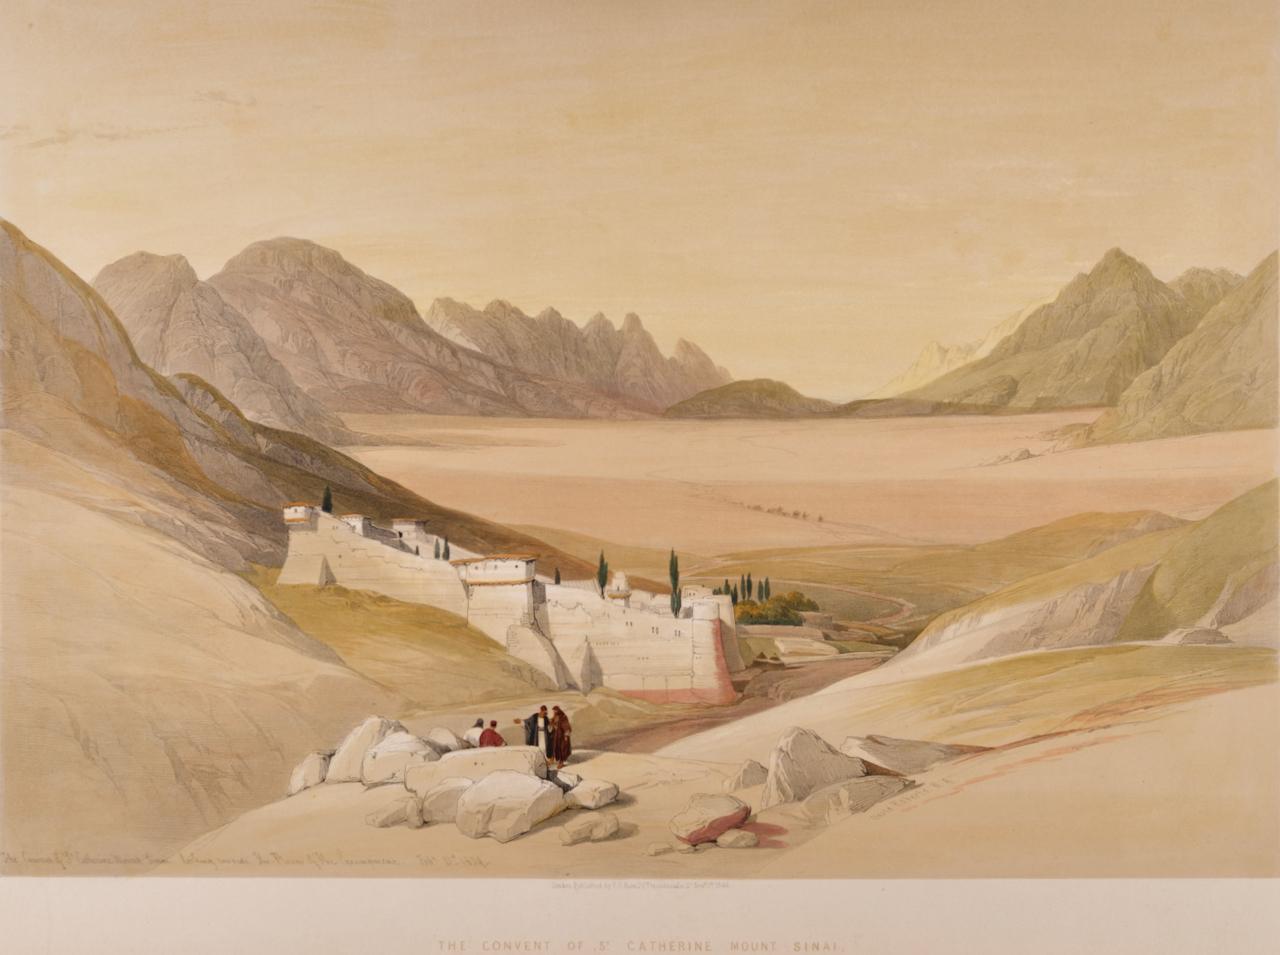 Convent of St. Catherine, Mount Sinai: Roberts' 19th C. Hand-colored Lithograph - Print by David Roberts